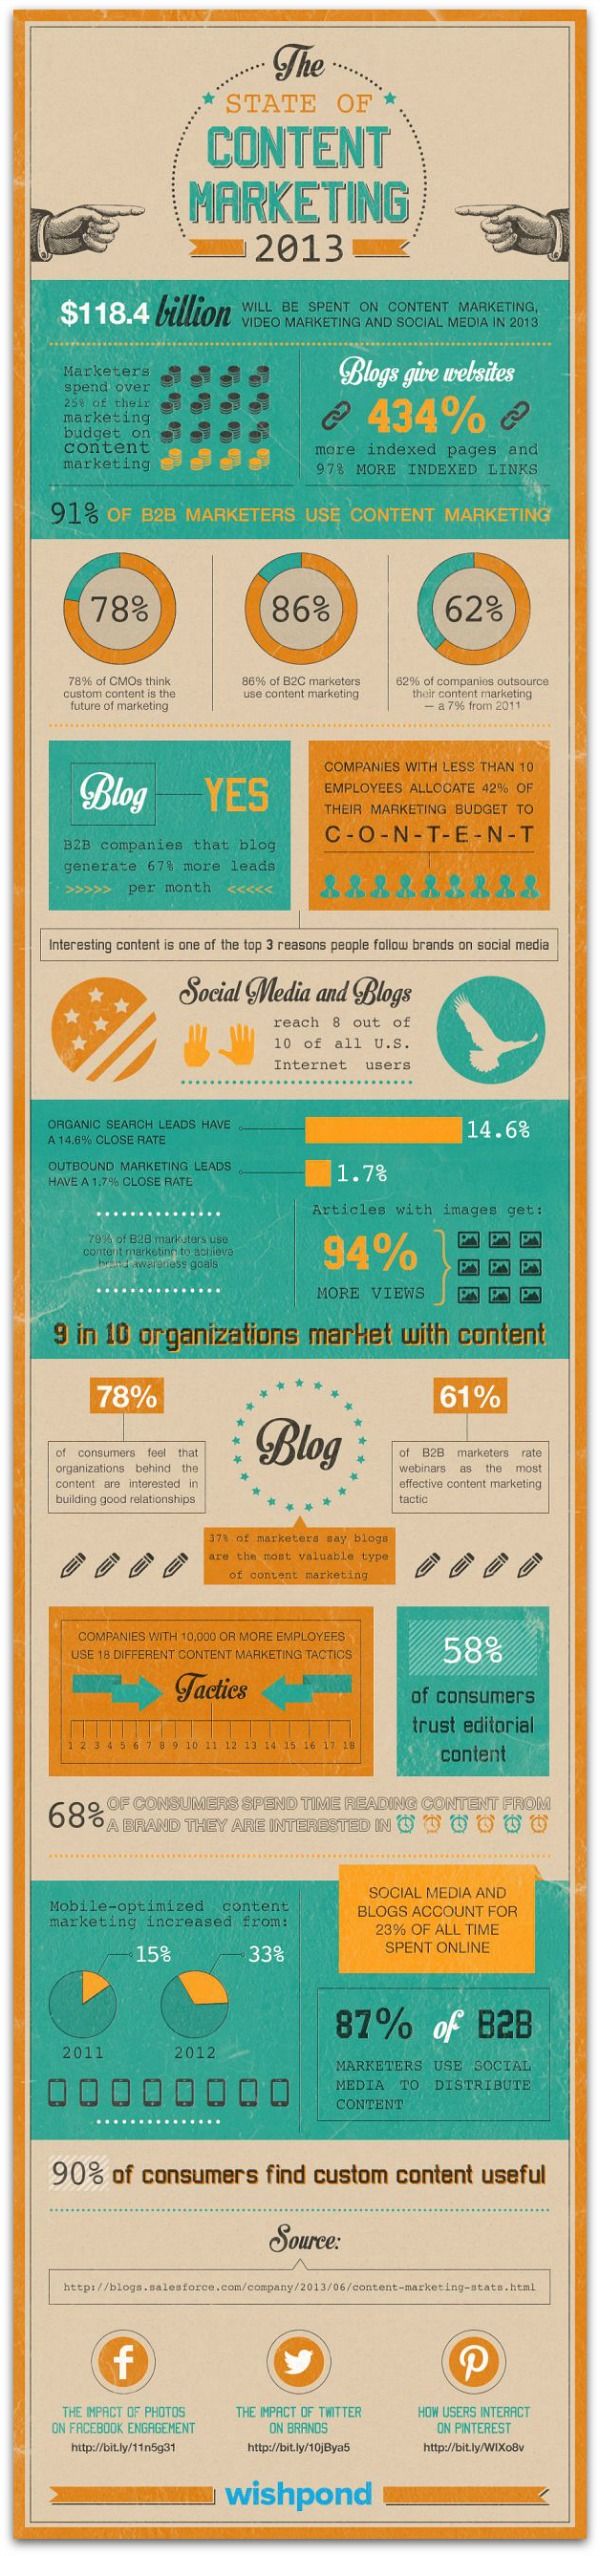 The State of Content Marketing 2013 via PR Daily